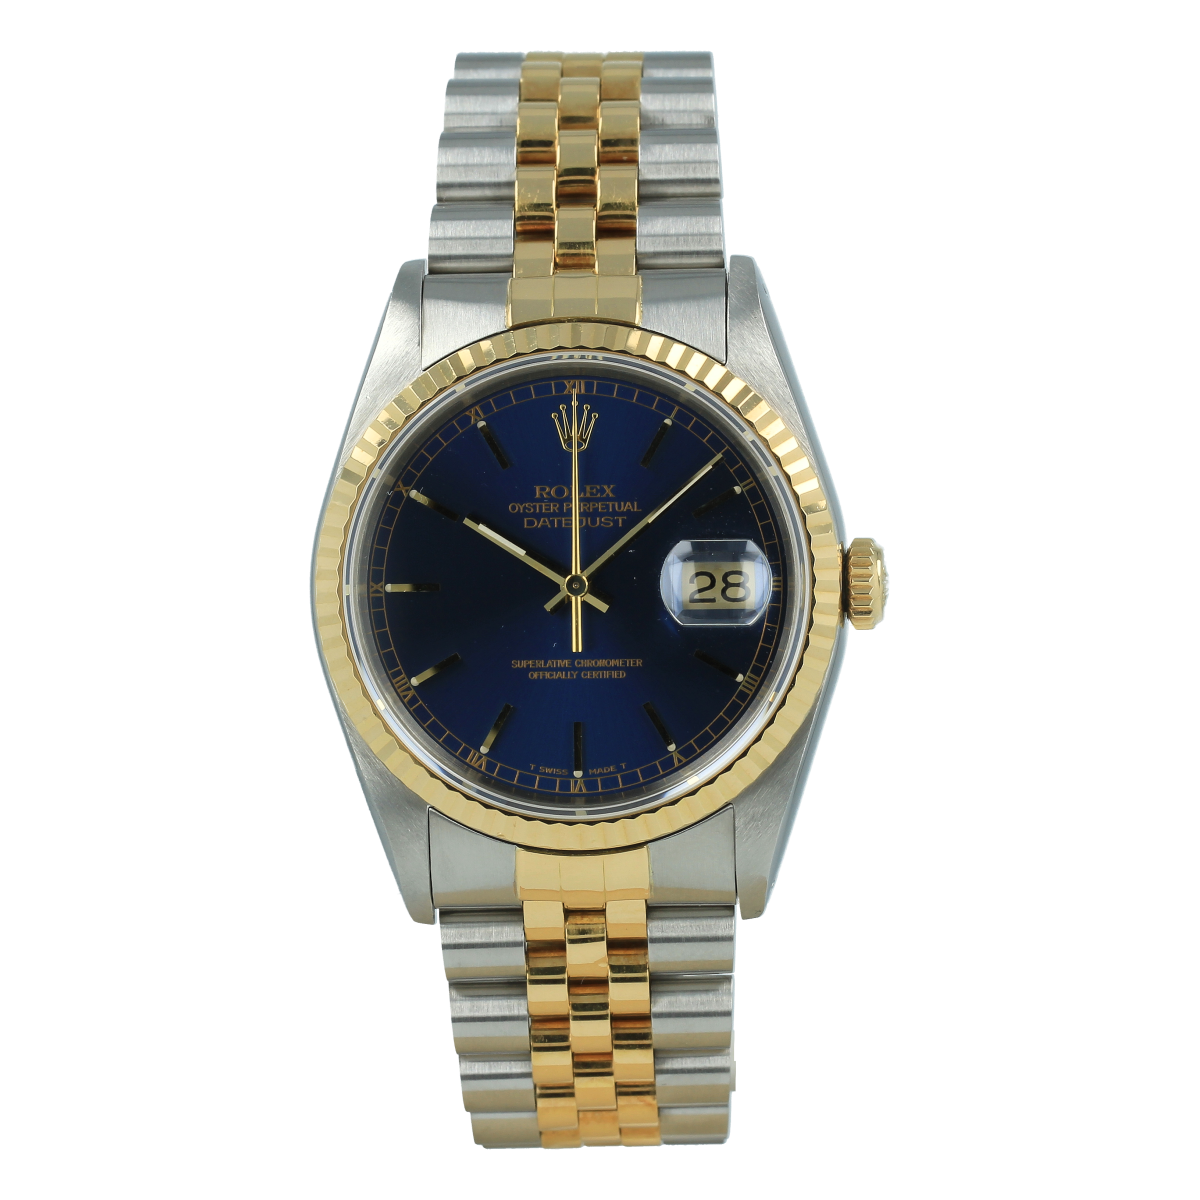 Rolex Datejust 16233 36mm Pyramid Dial Steel and Yellow Gold | Buy pre-owned Rolex watch